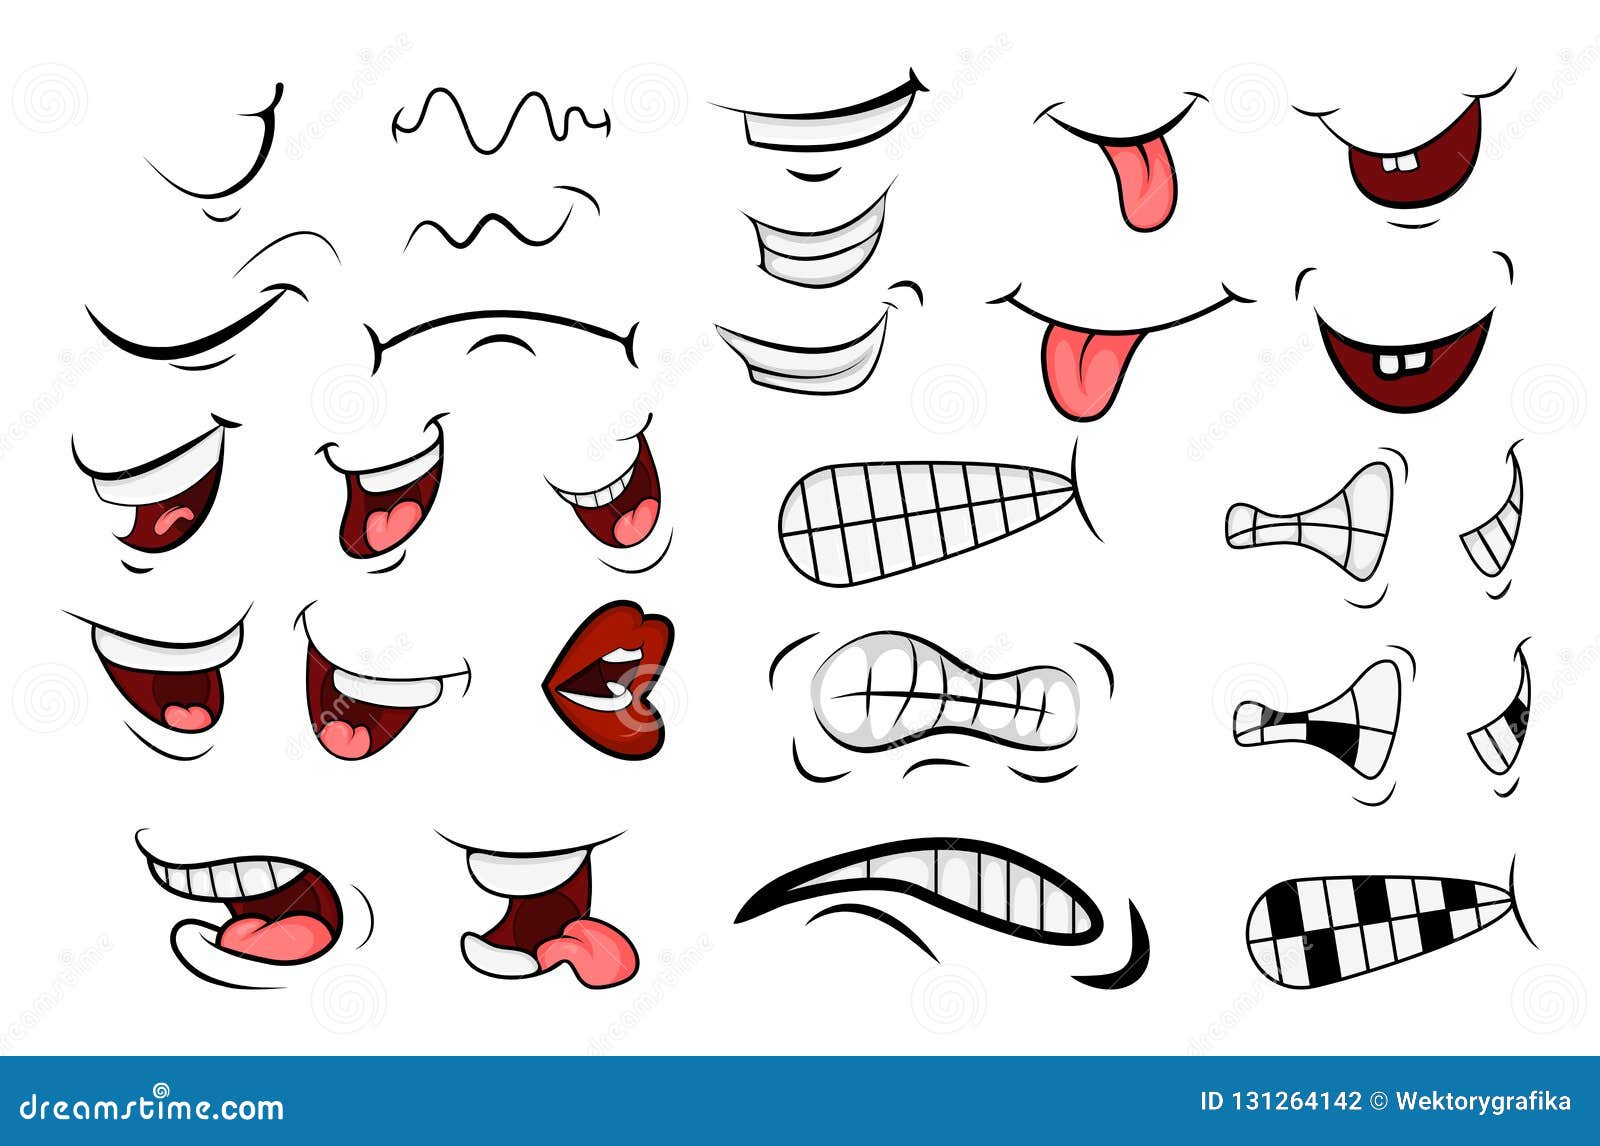 Mouth Cartoon Smile Stock Illustrations – 70,267 Mouth Cartoon Smile Stock  Illustrations, Vectors & Clipart - Dreamstime